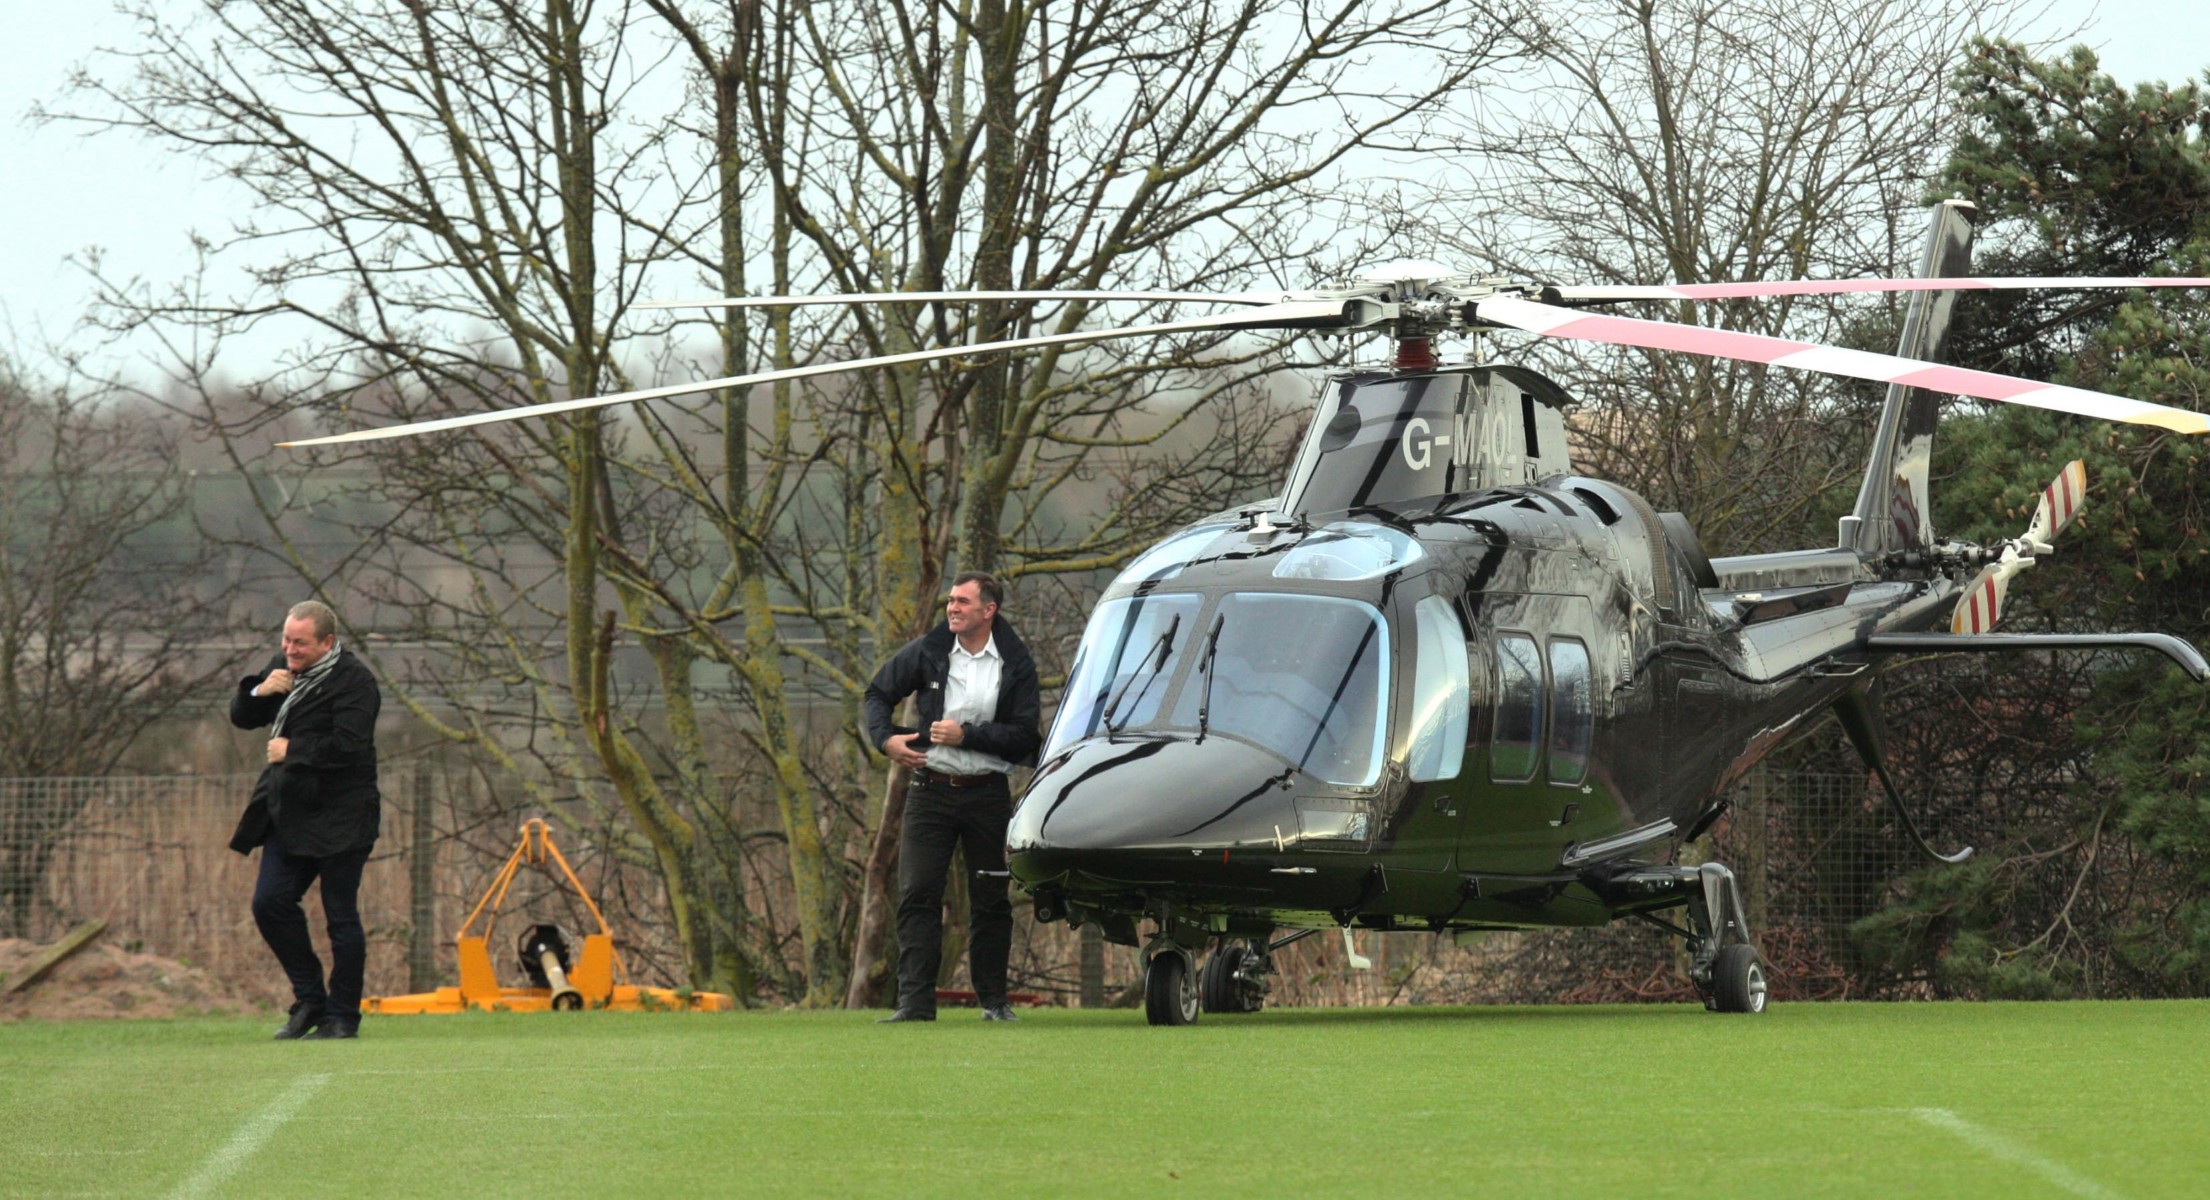 Ashley has a £5m helicopter that he takes to work